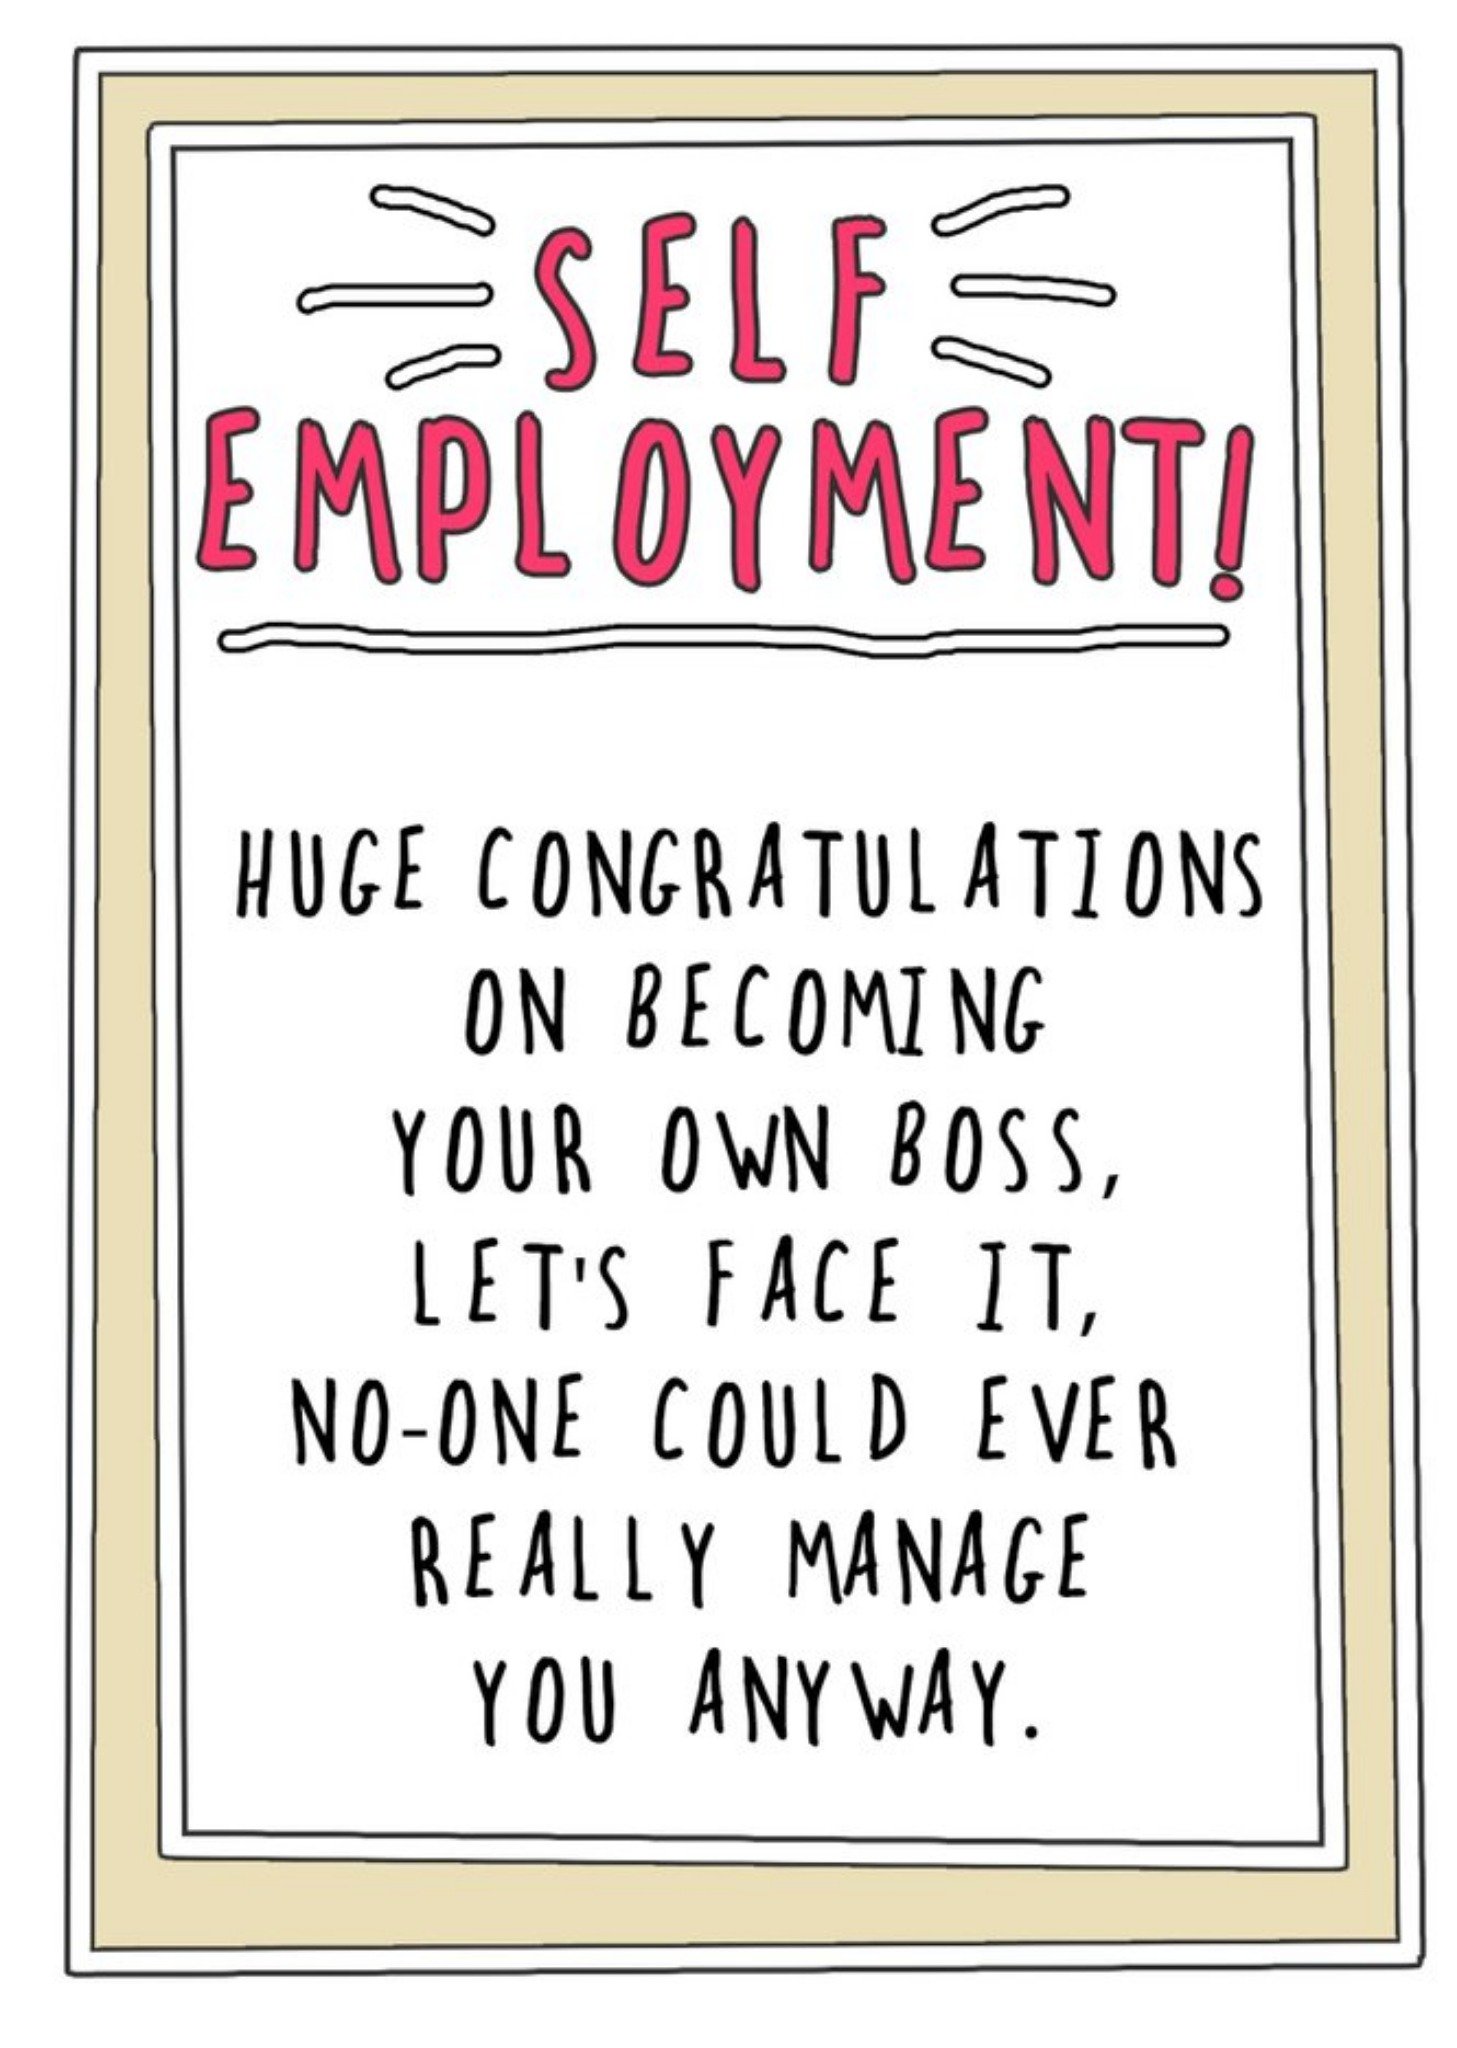 Go La La Funny Self Employment Let's Face It, No-One Could Ever Really Manage You Anyway Card Ecard